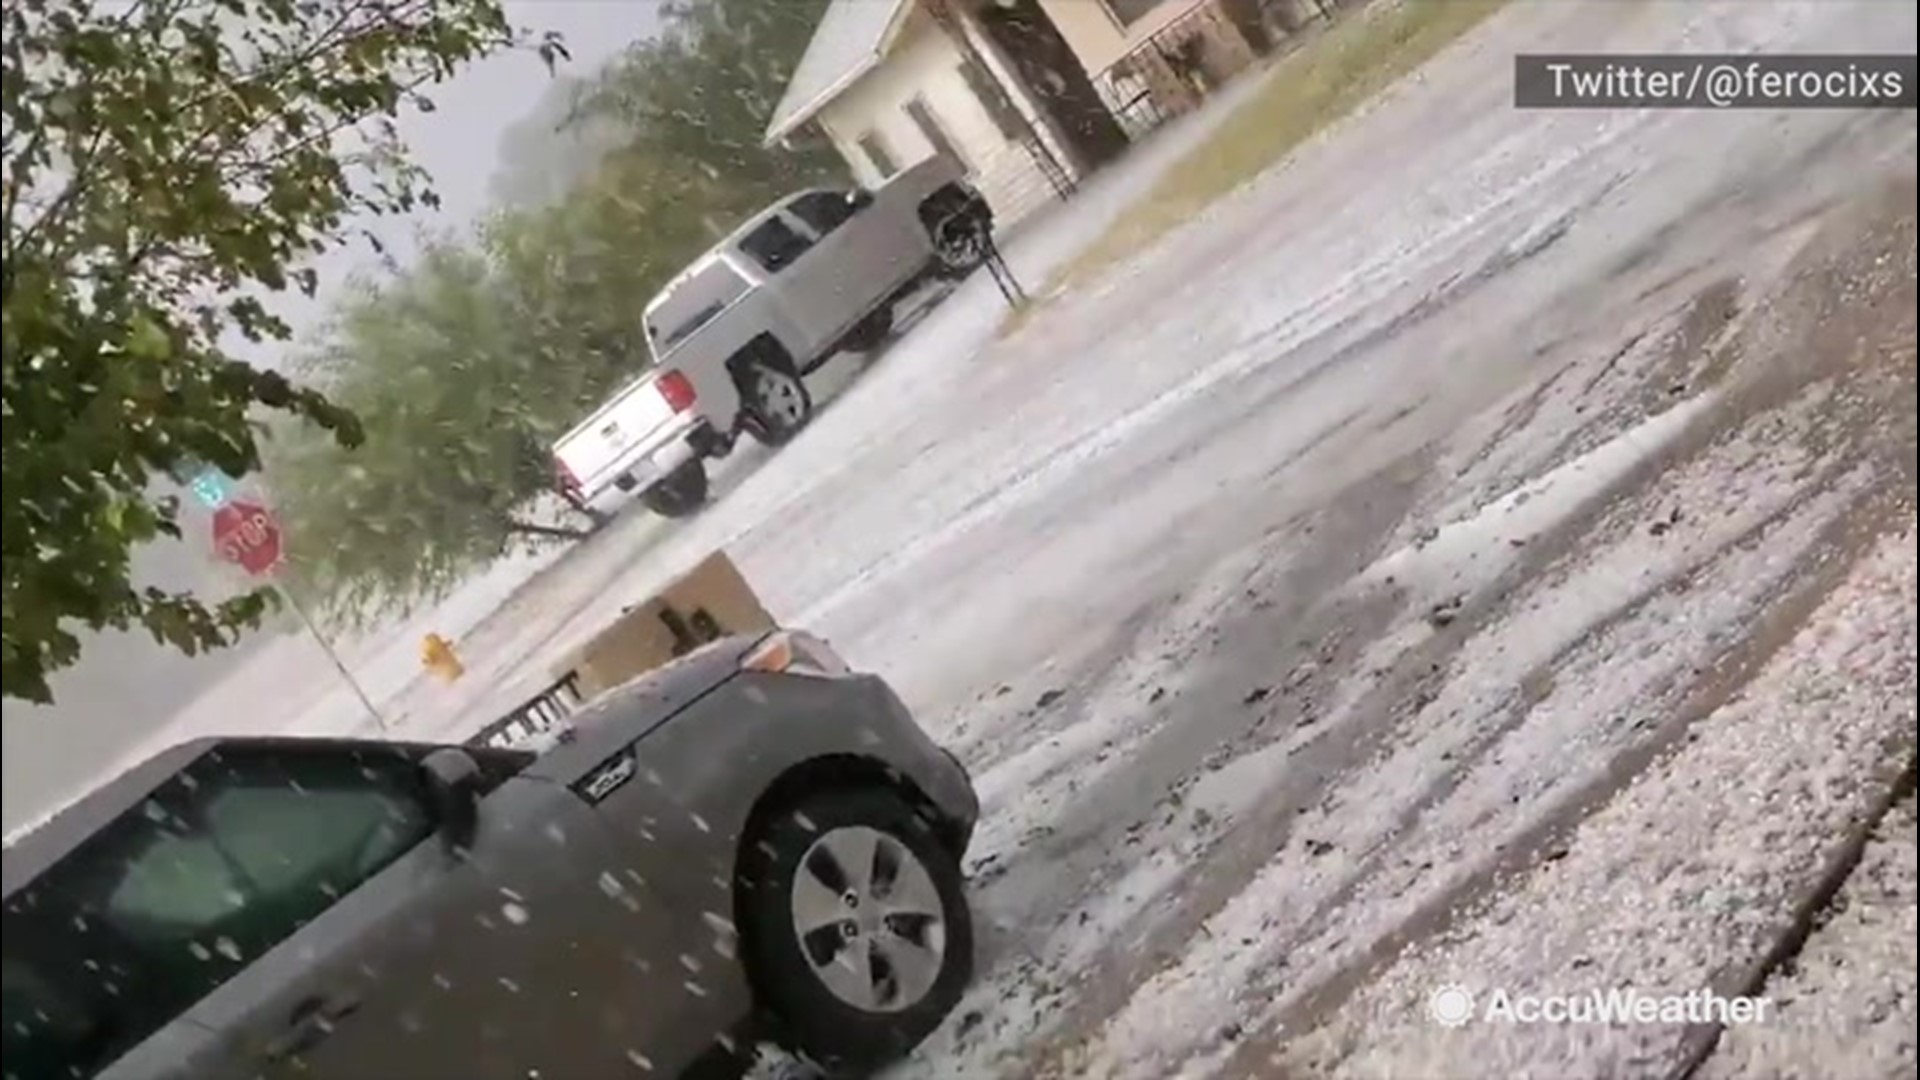 The roads of Avondale, Arizona, were filled with water on Nov. 21, due to the relentless downpour of rain and hail that hit the town.